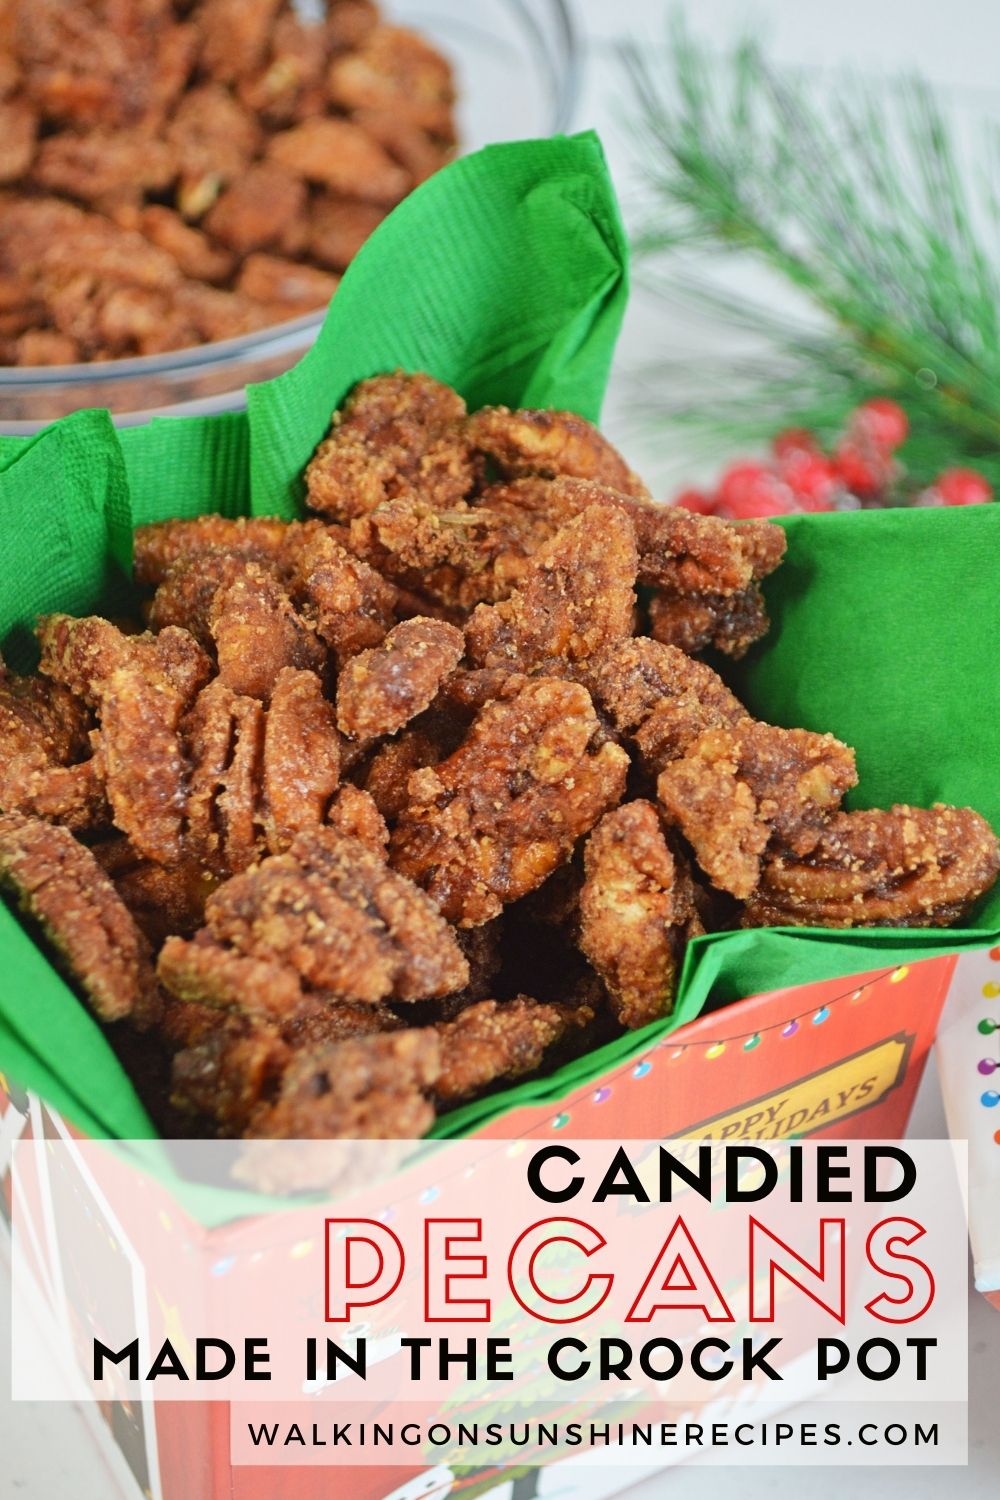 Christmas snacks to make - Candied pecans in Christmas gift box.